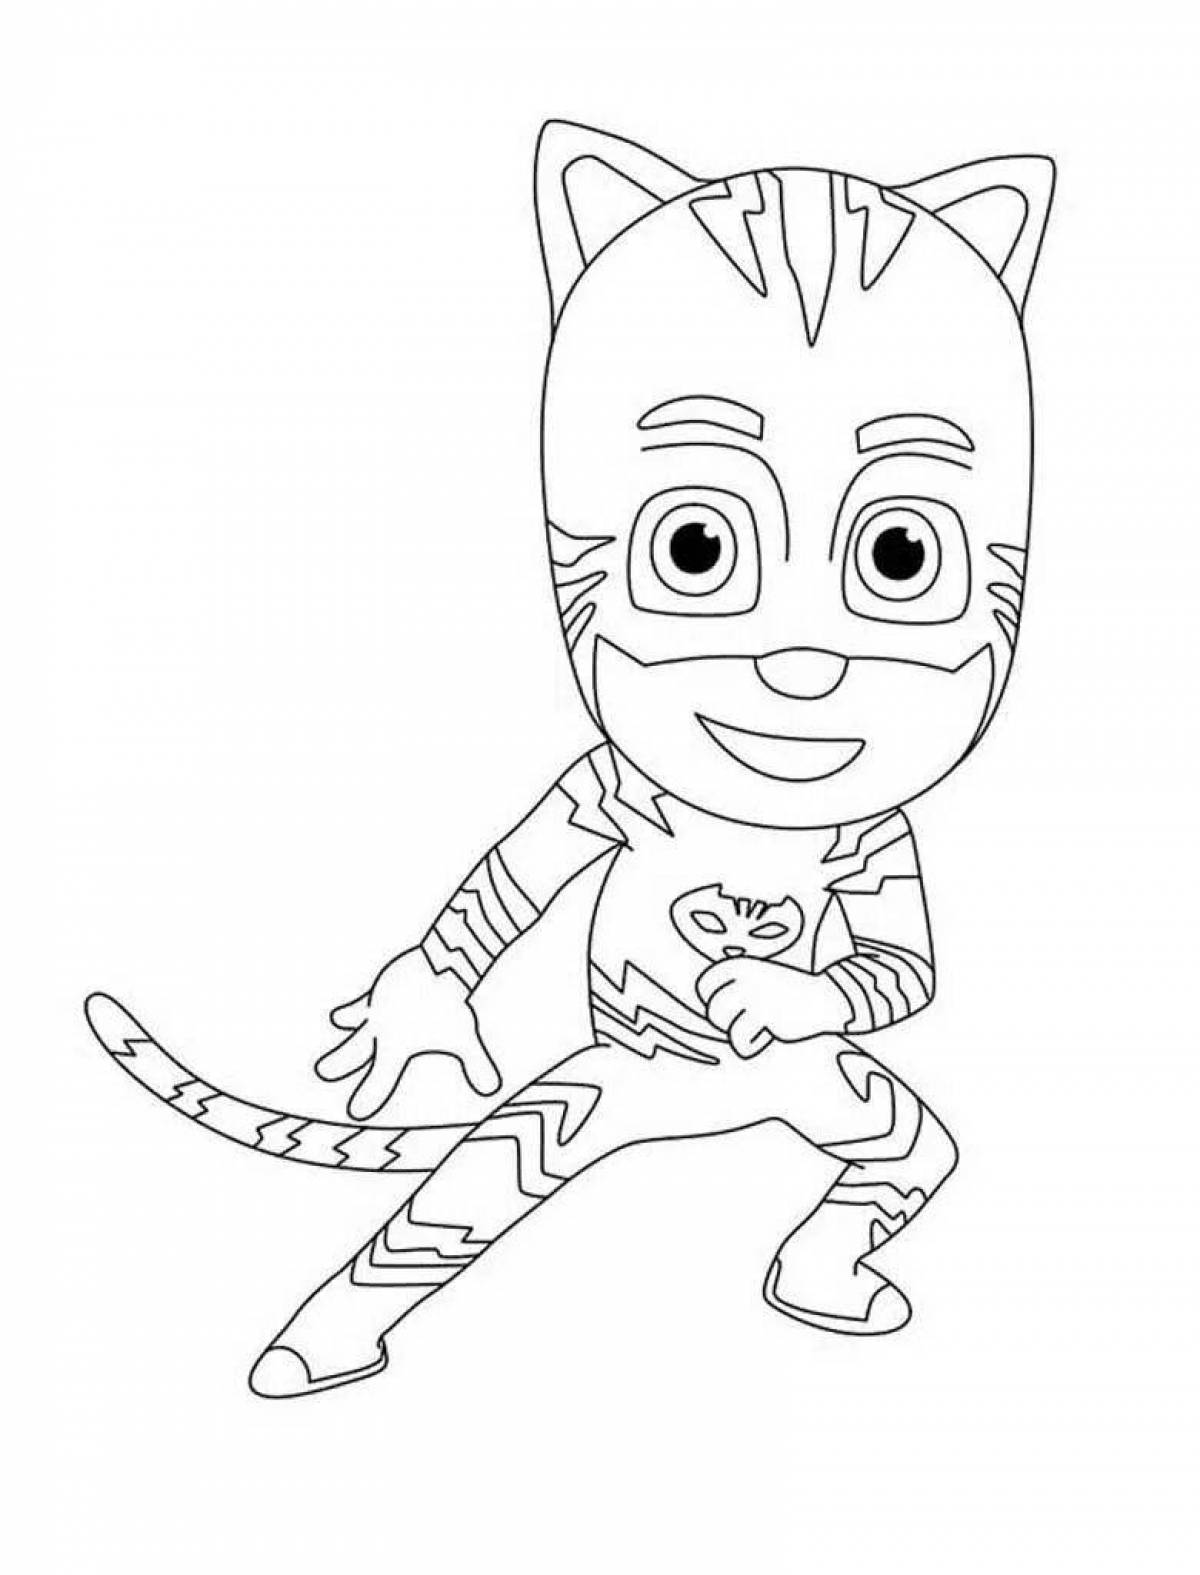 Exquisite alet masked character coloring pages